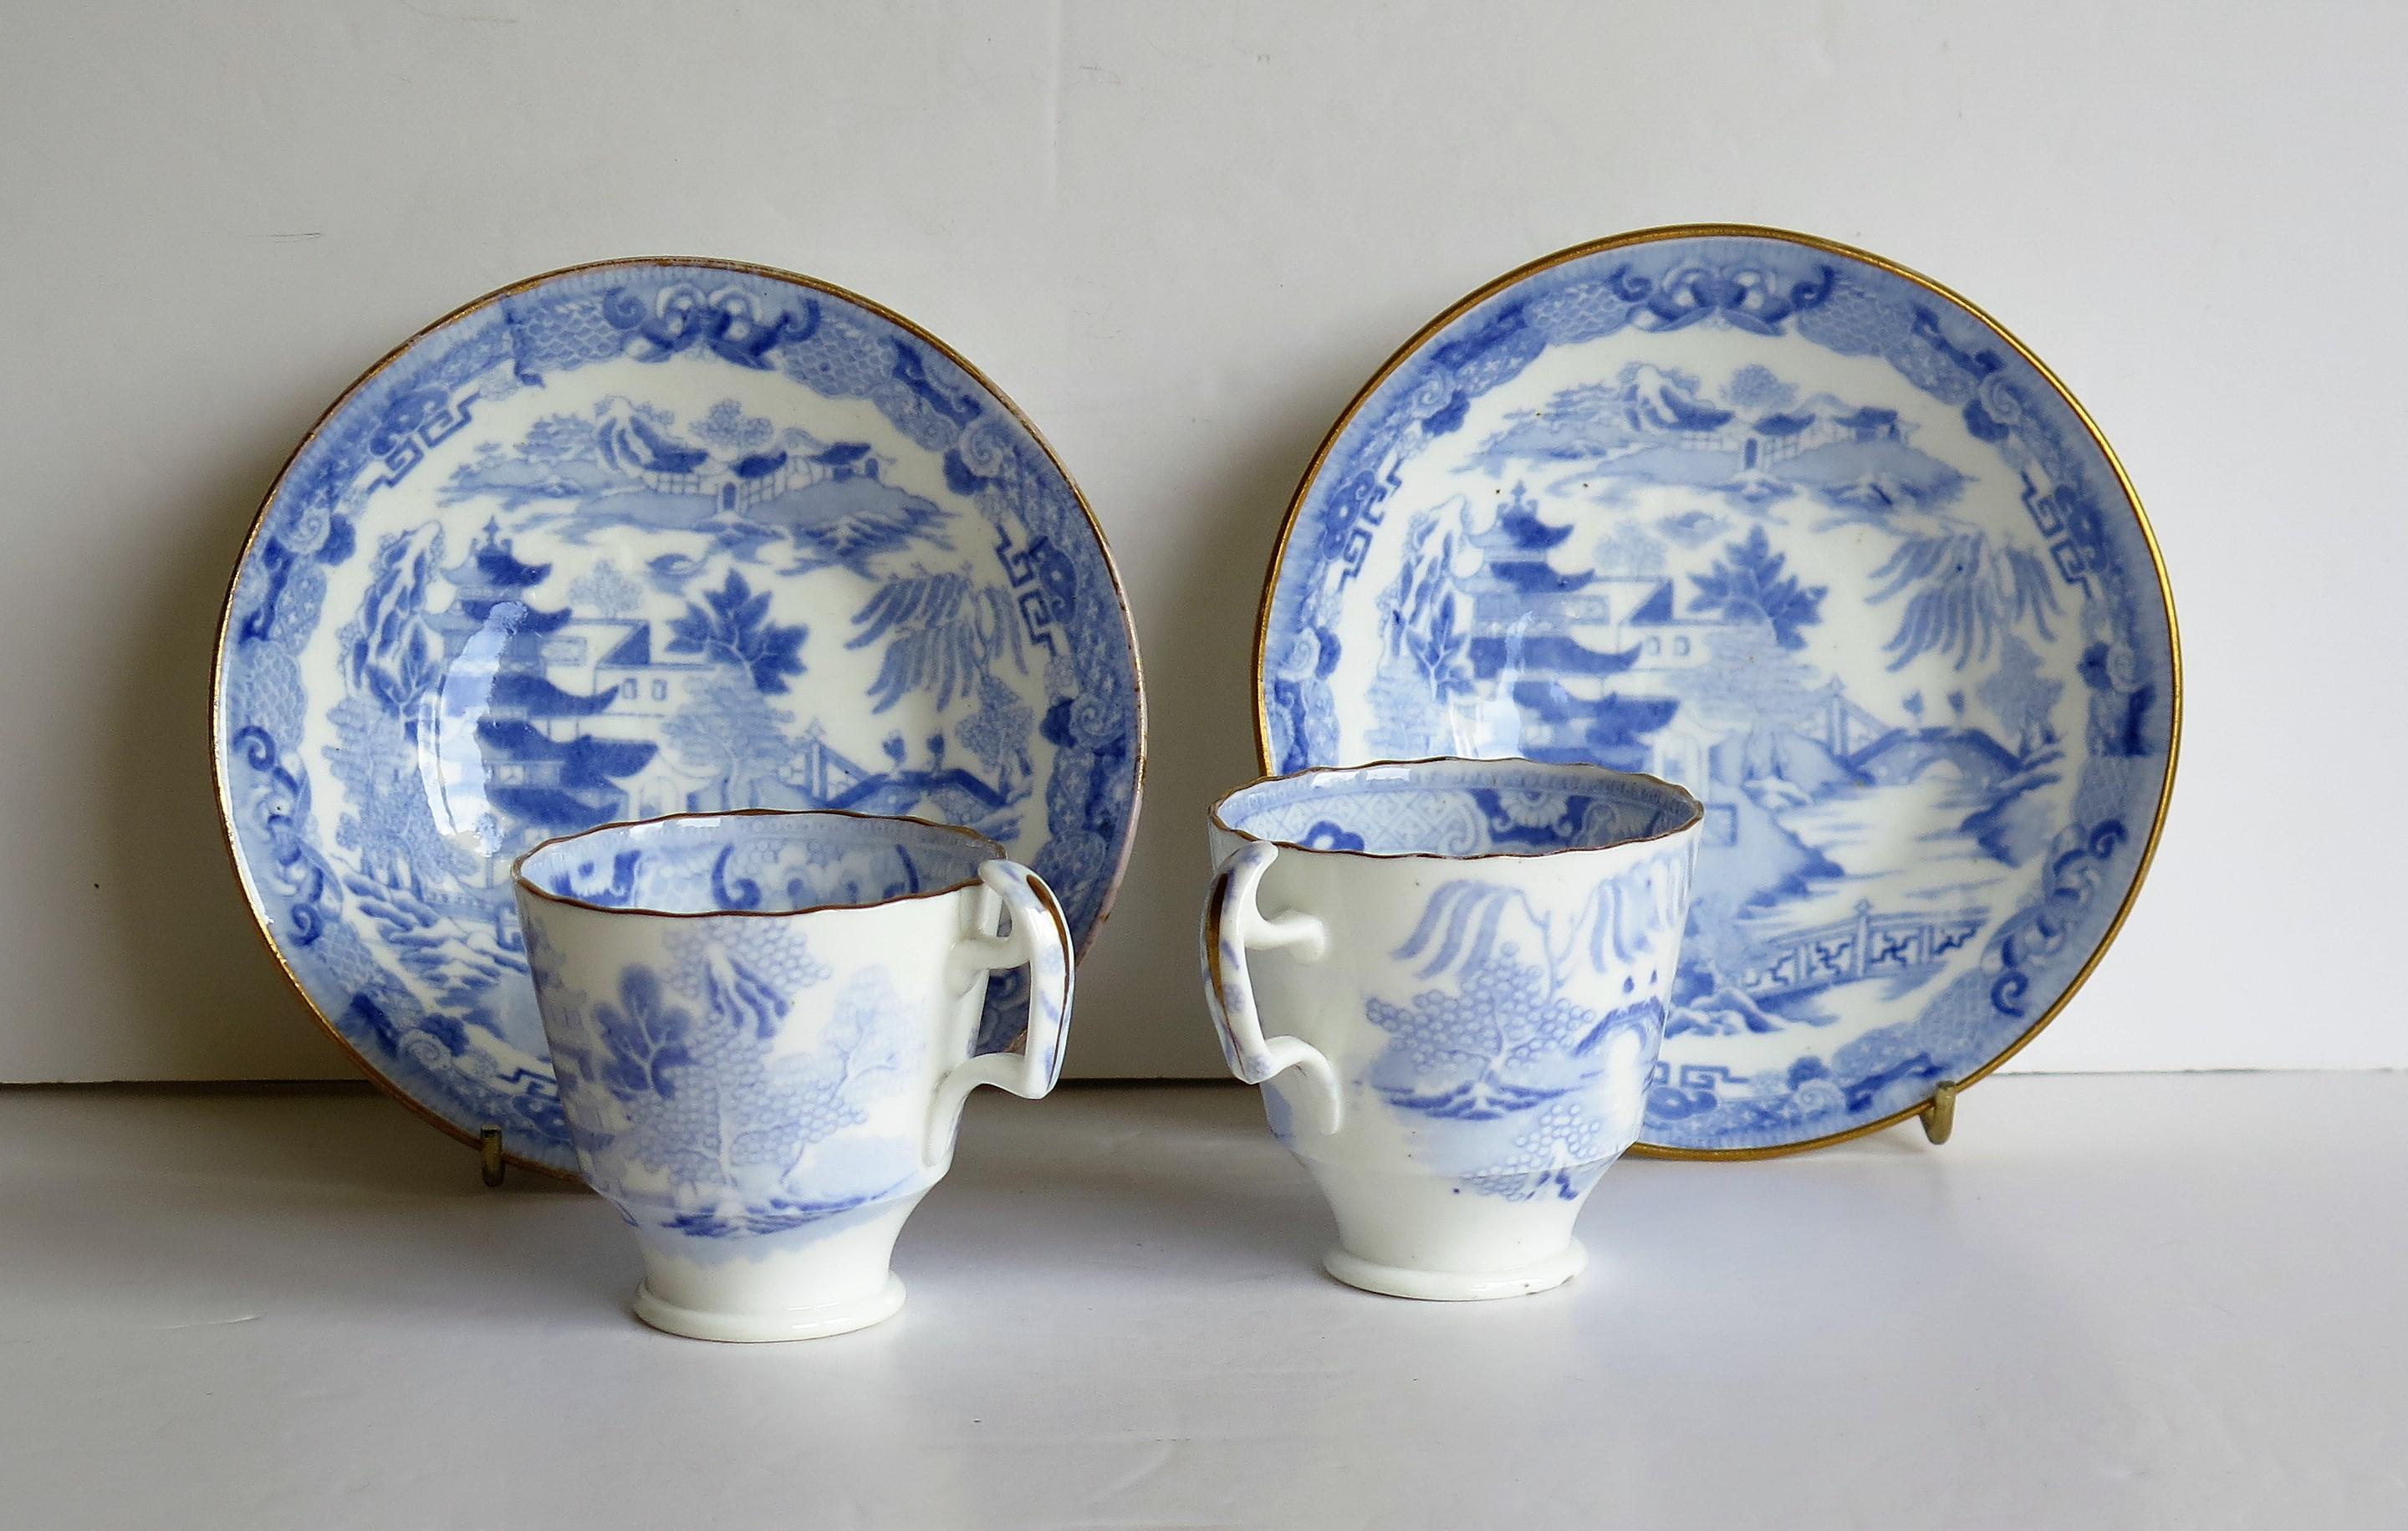 This is a porcelain blue and white, hand gilded pair of coffee cups and saucers made by Miles Mason (Mason's), Staffordshire Potteries, in the early 19th century, circa 1812-1820.

All pieces are well potted with the cups having the 